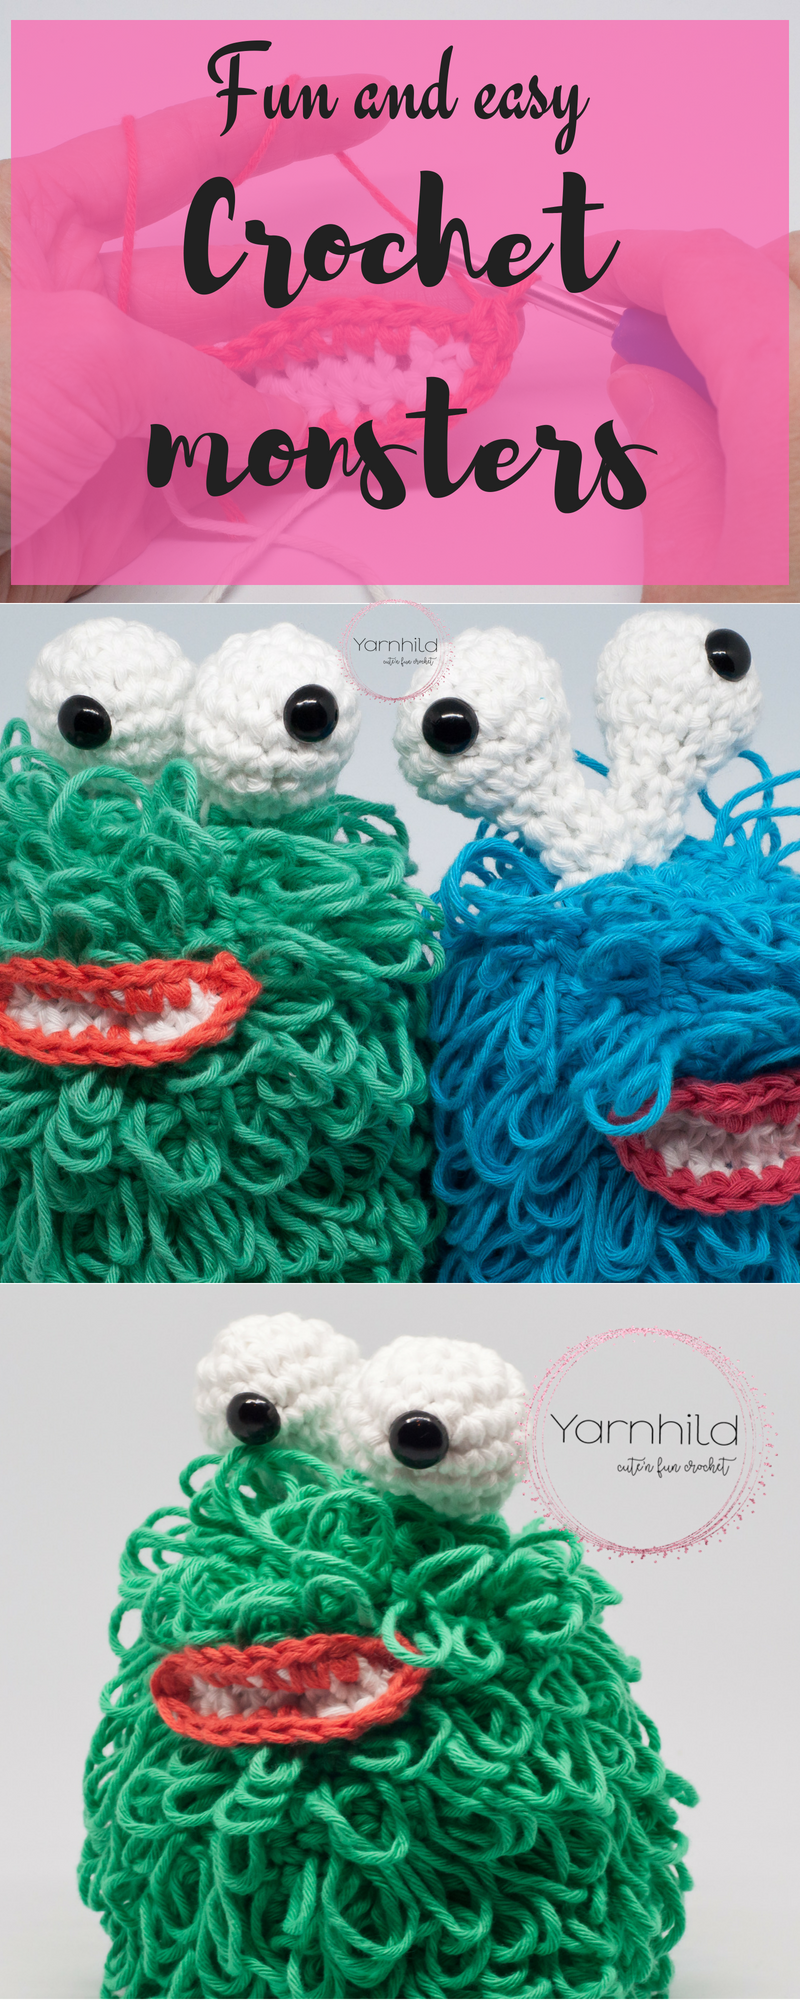 Free crochet pattern for these fun and simple crochet monsters